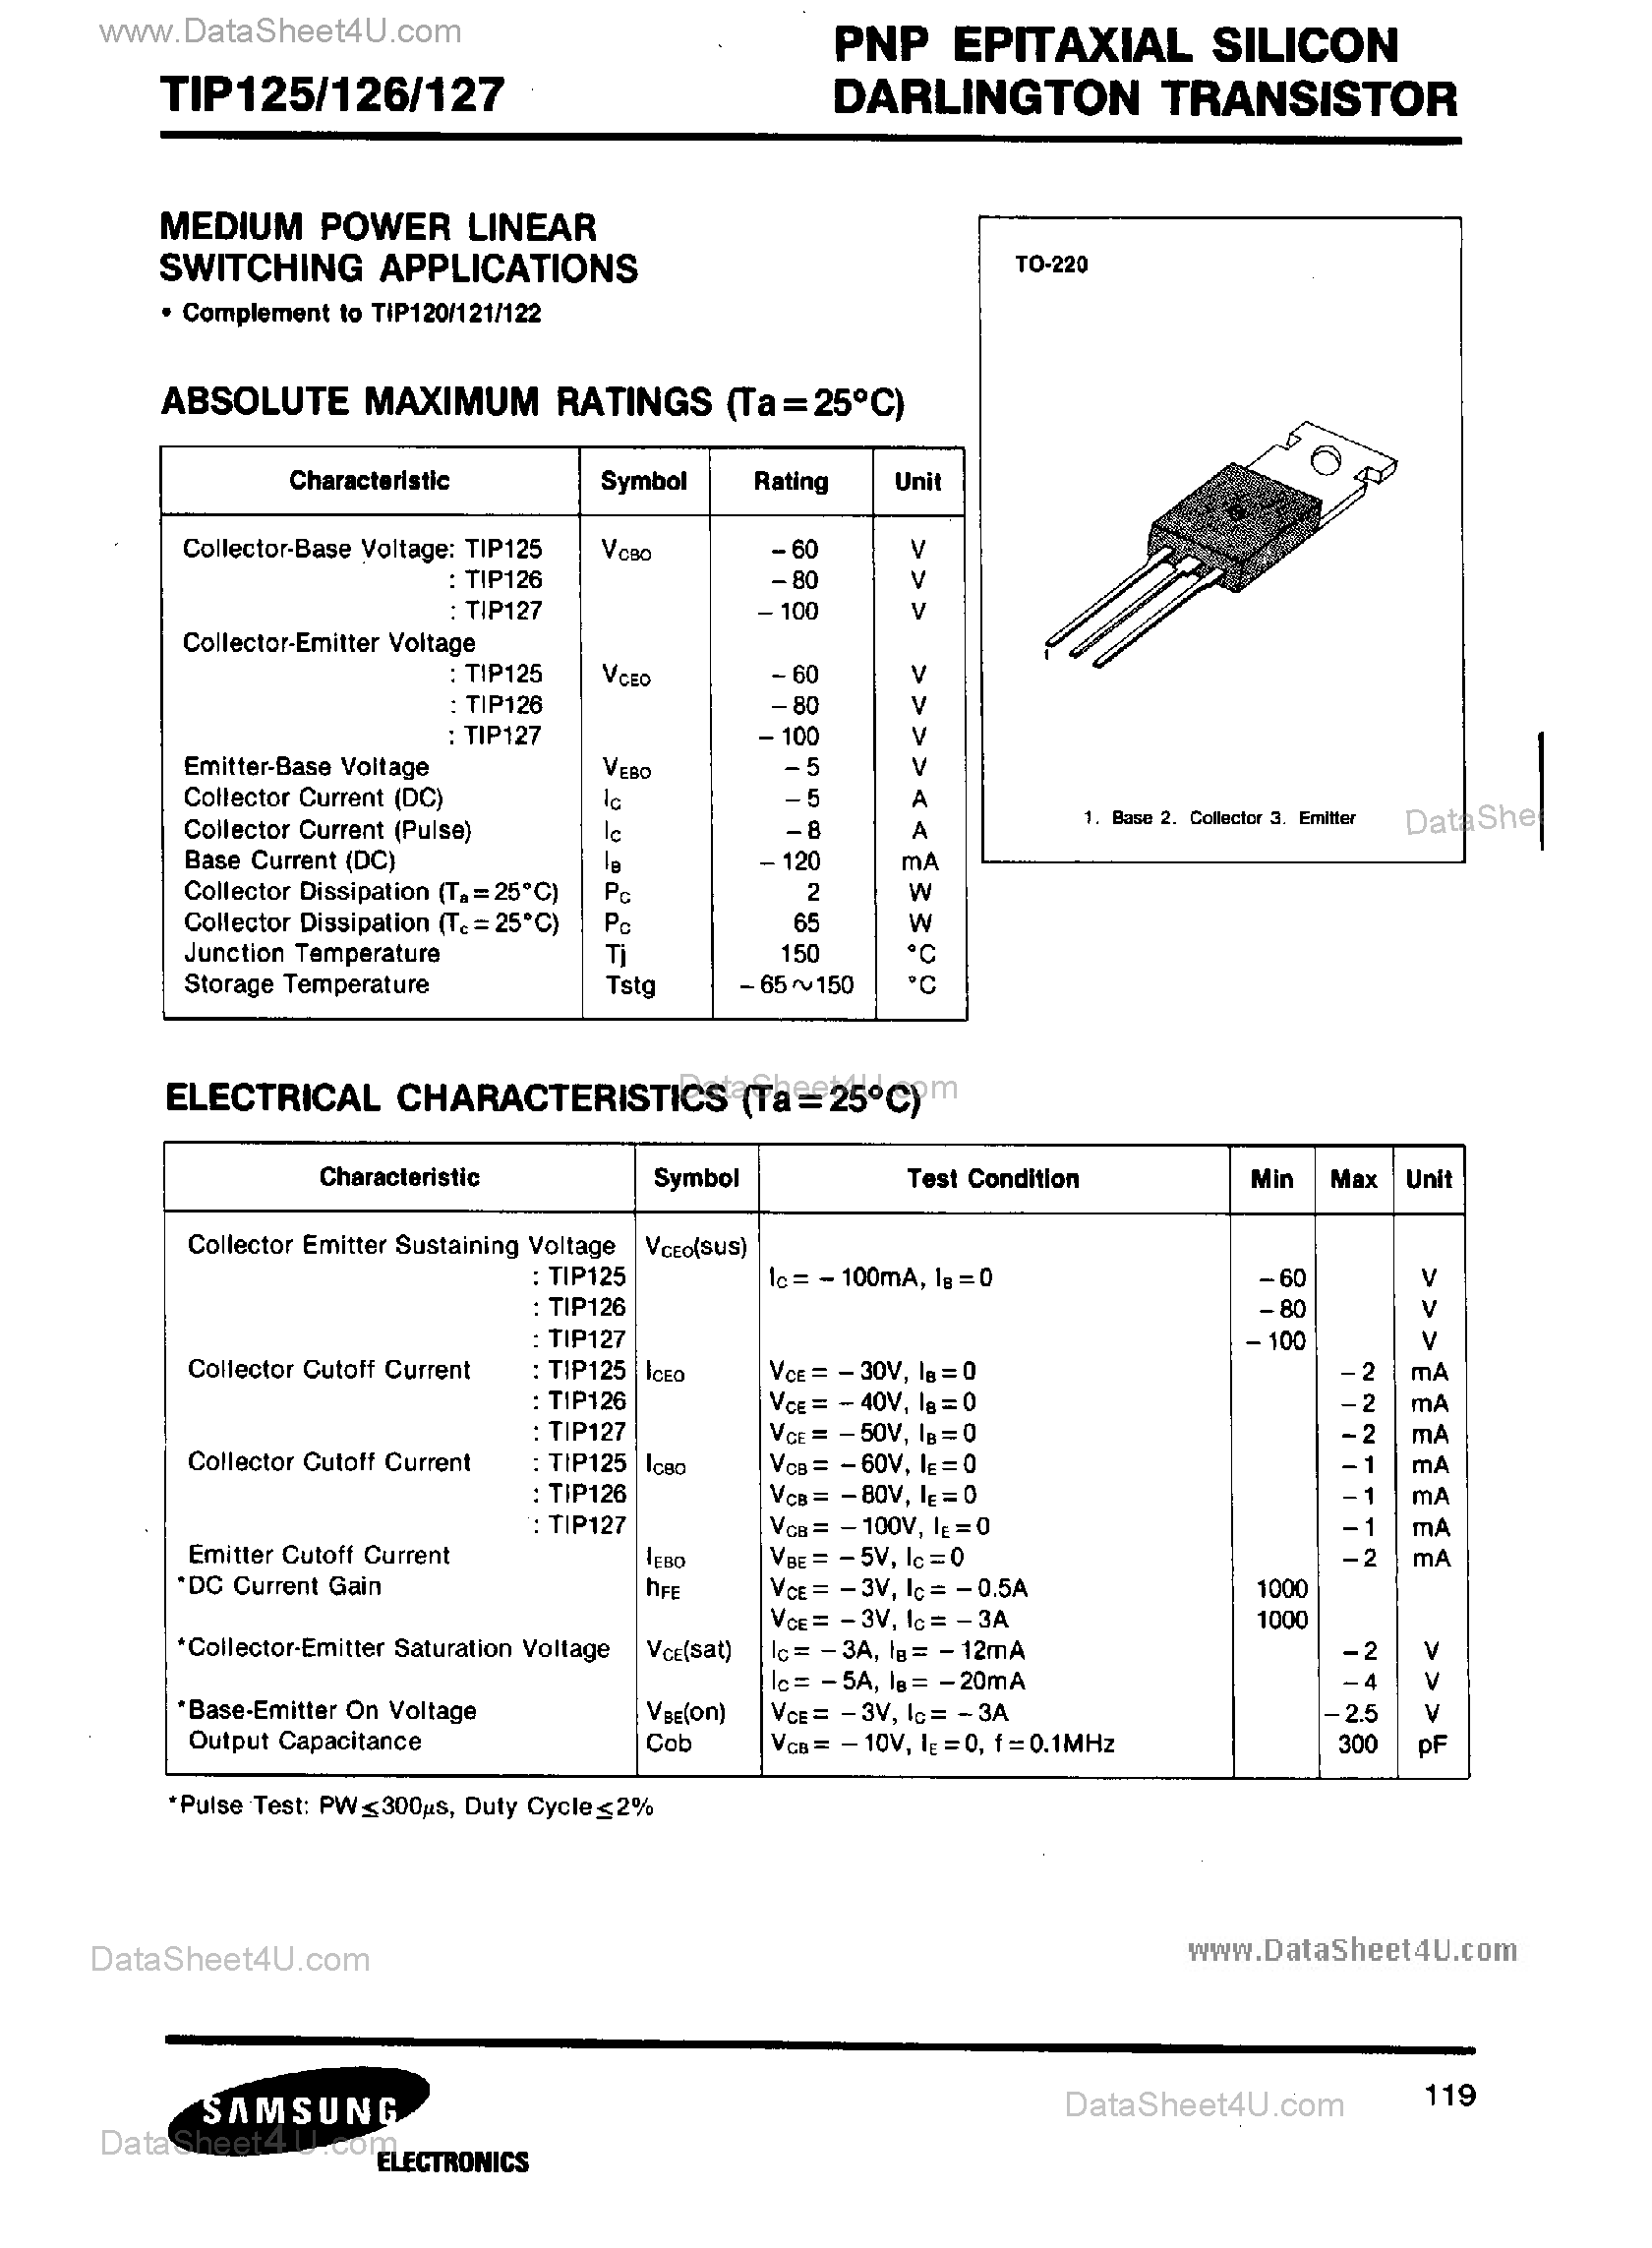 Даташит TIP125 - (TIP125 - TIP127) Medium Power Linear Switching Applications страница 1